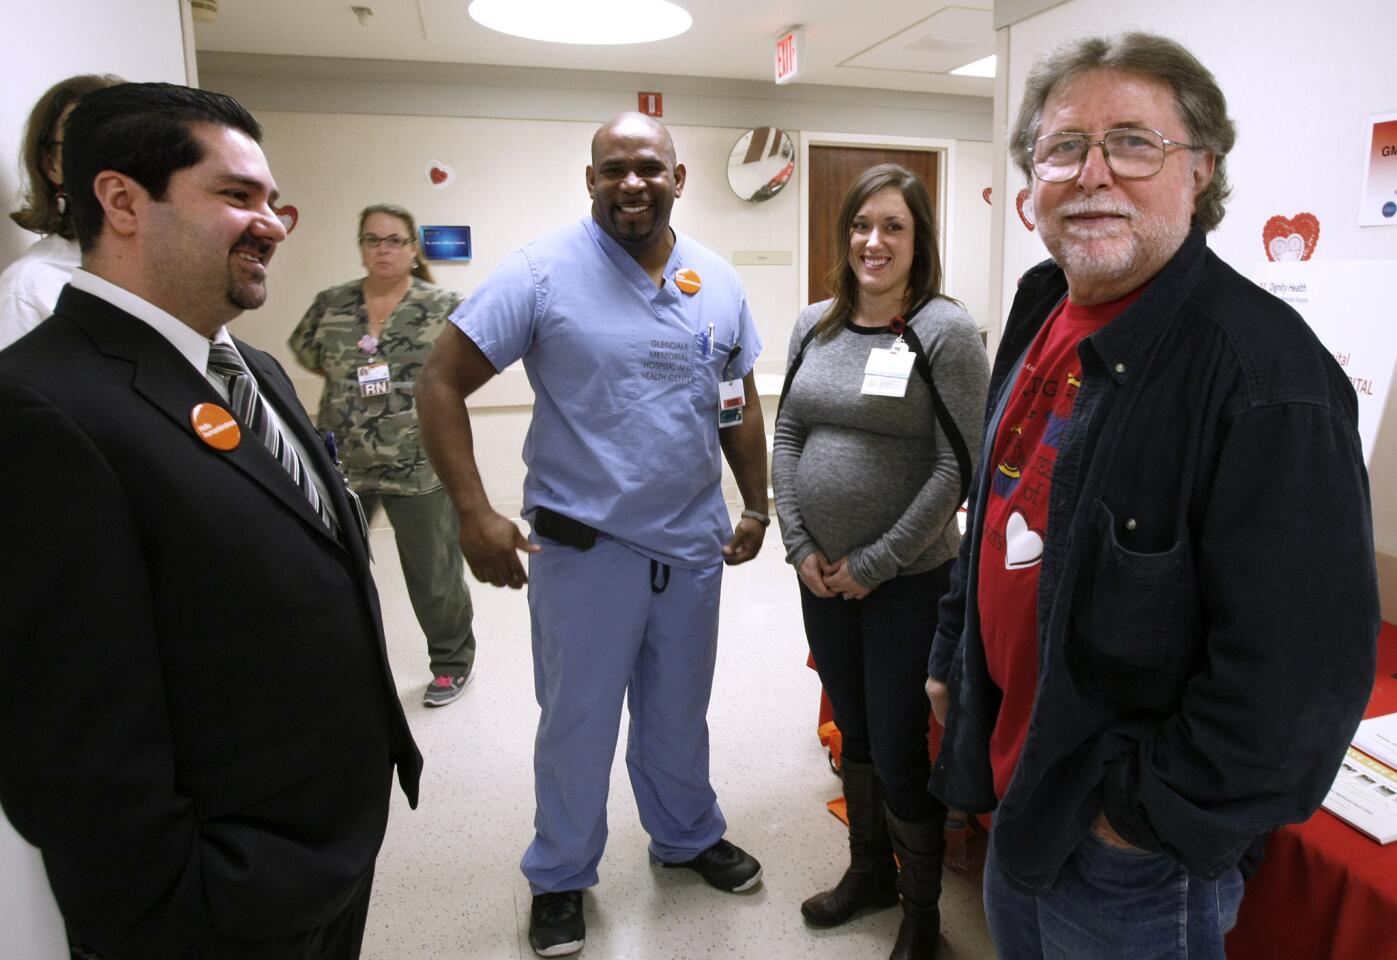 Rudy Donofrio, 66 of Glendale, right, got a chance to meet his life savers and hospital employees, left to right, Housni Hariri, Howard Ferguson and Michelle Carmichael, during the Kings and Queens of Heart celebration at Glendale Memorial Hospital in Glendale on Thursday, Feb. 20, 2014. Donofrio was having a heart attack in front of the hospital about 6 months ago when the aforementioned jumped into action and saved his life.